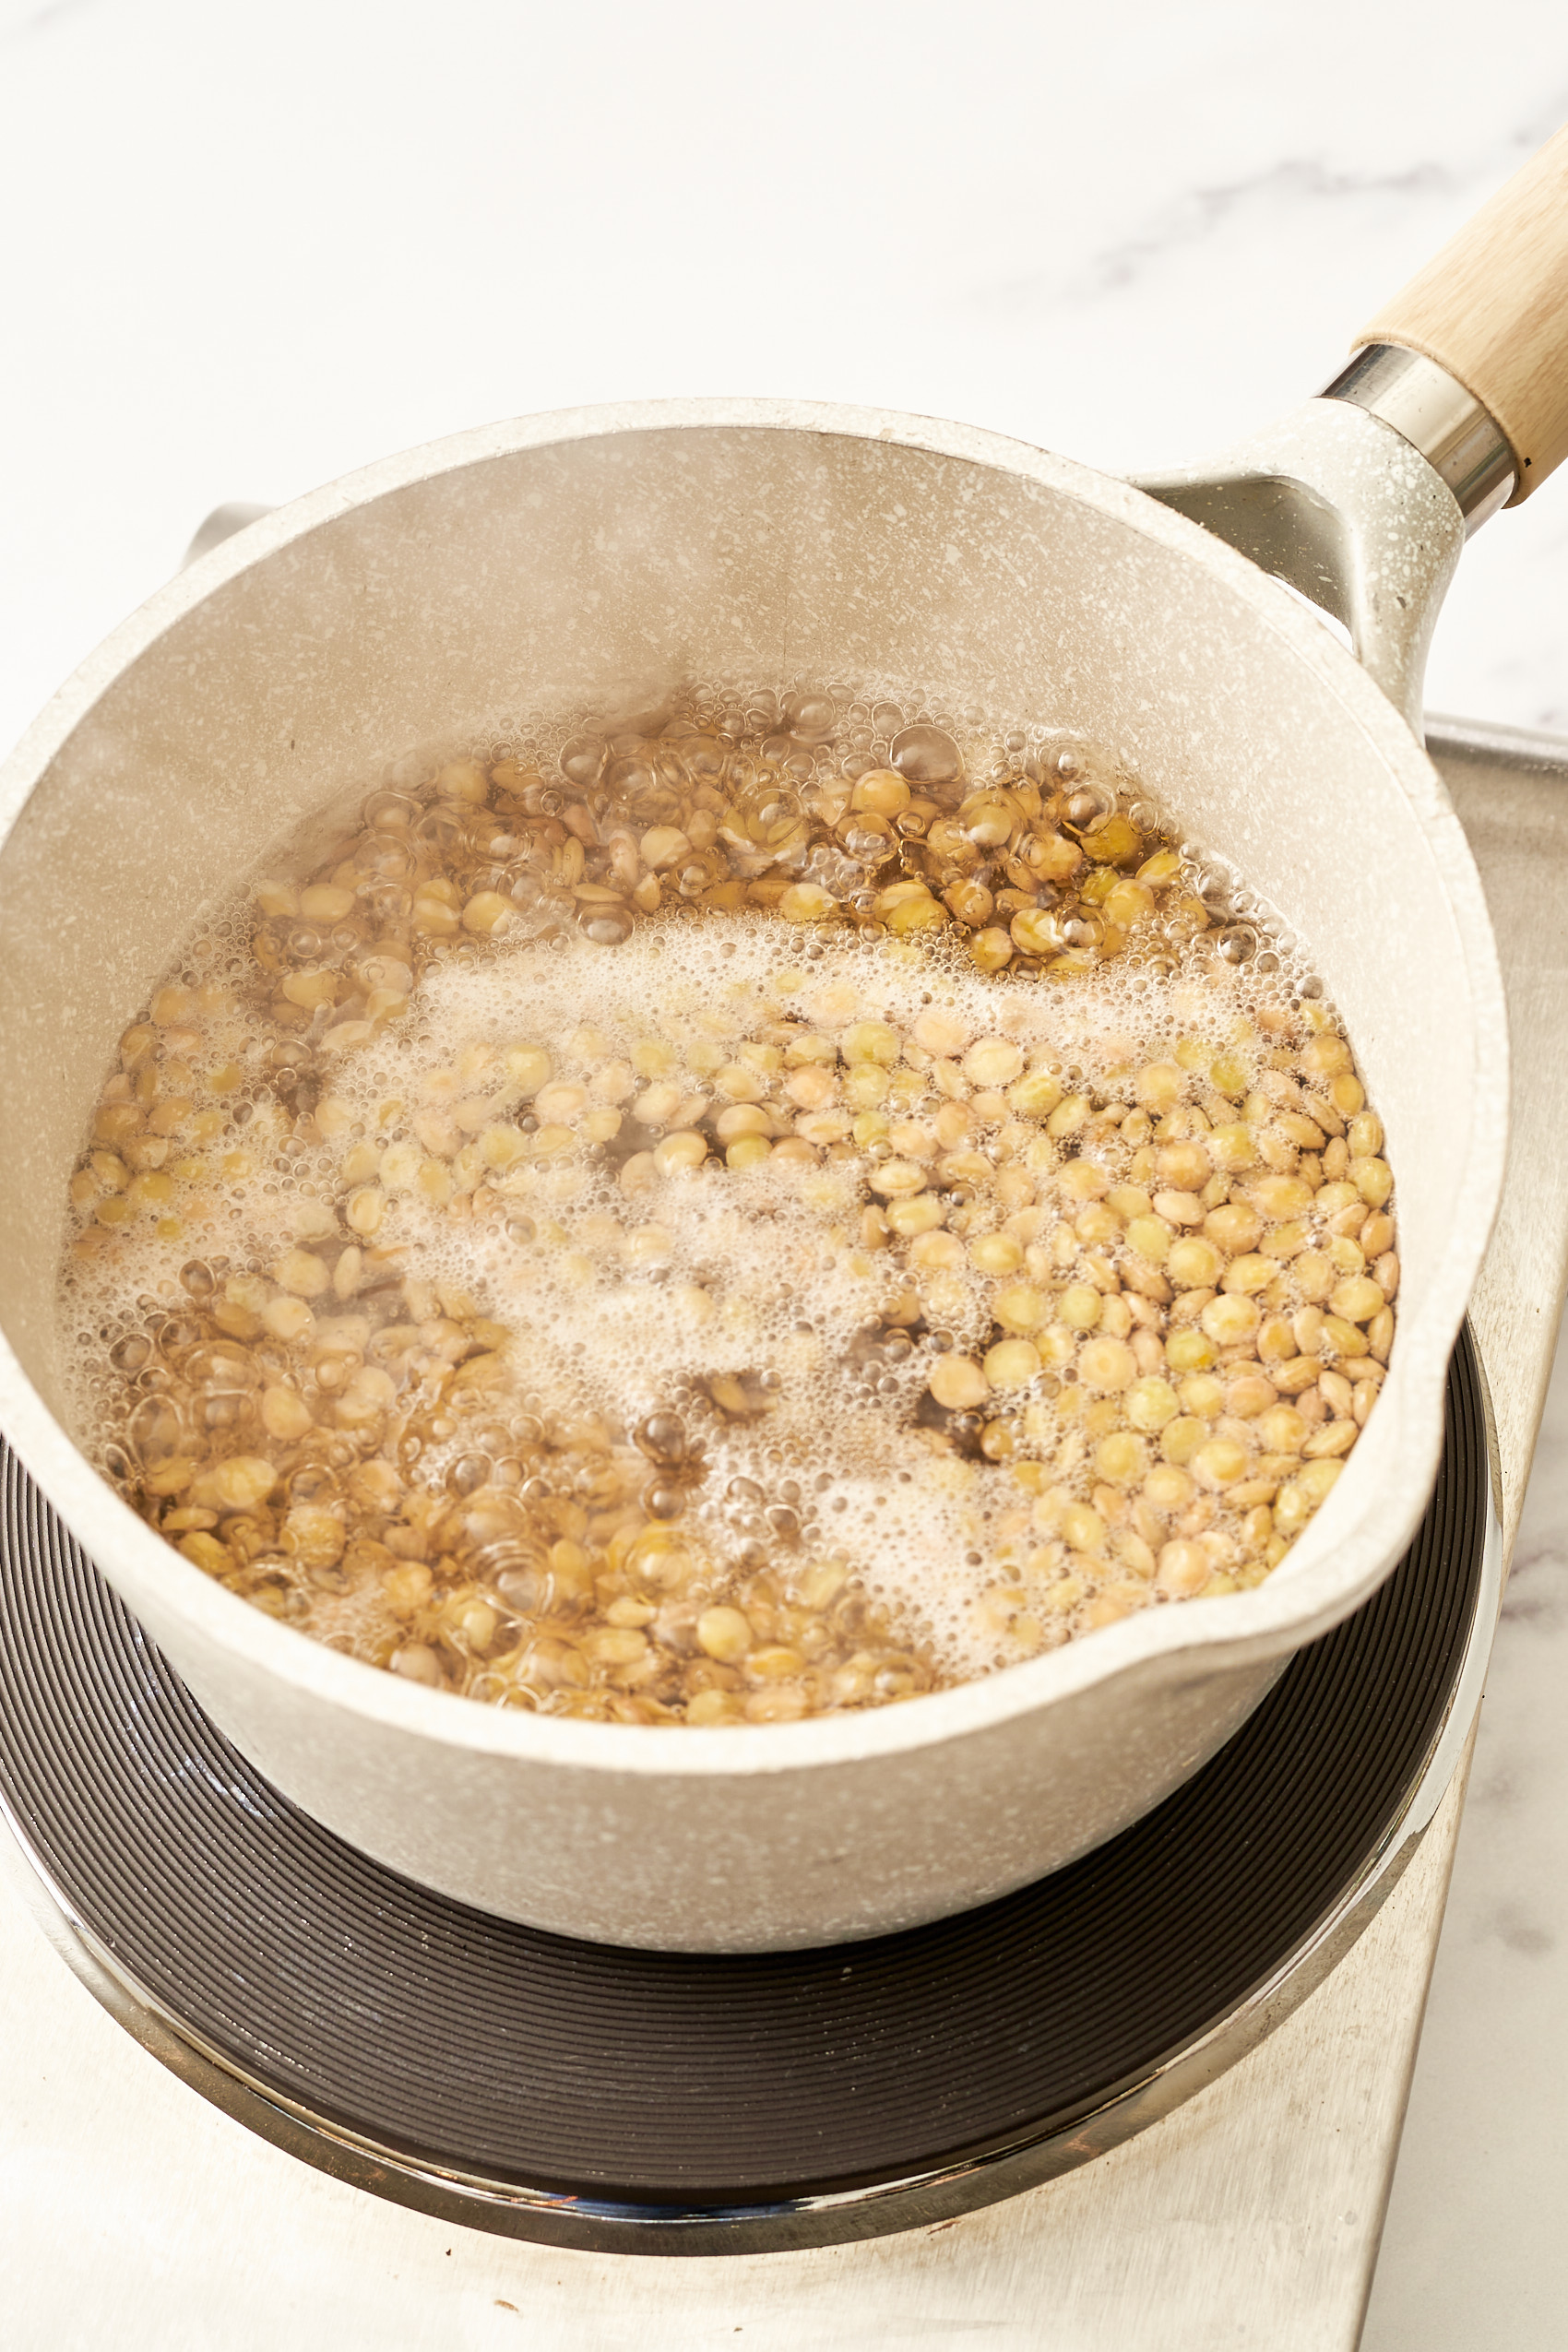 a pot of green lentils boiling on the stove